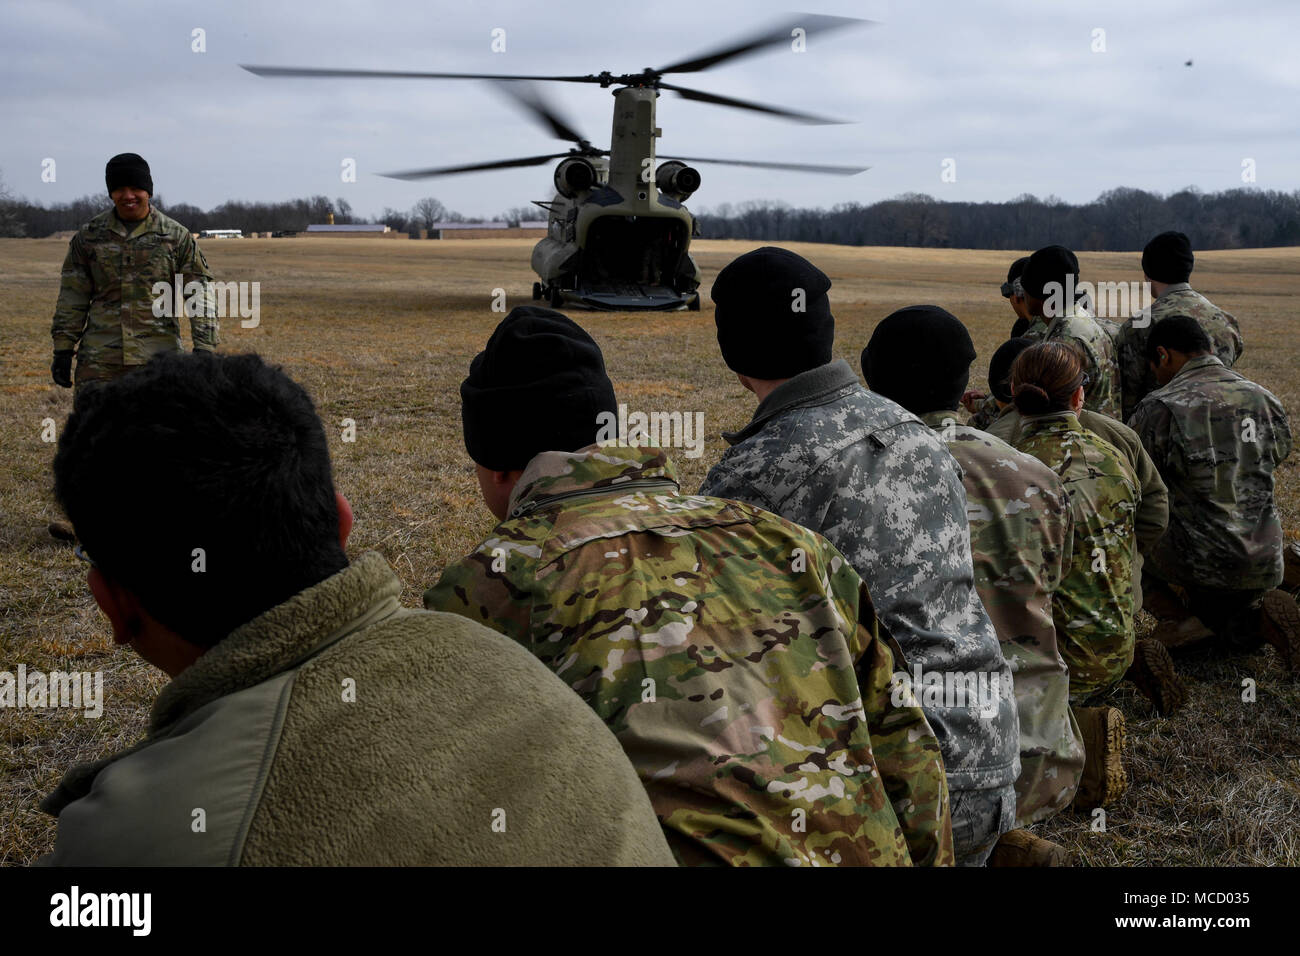 Soldiers with the 101st Combat Aviation Brigade, 101st Airborne Division (Air Assault) load equipment into a CH-47 Chinook helicopter in preparation to jump their tactical operations center (TOC) to a new location during Warfighter, a two-week command and control exercise February 13, 2017 at Ft. Campbell, Ky. (U.S. Army photo taken by Sgt. Marcus Floyd, 101st Combat Aviation Brigade) Stock Photo